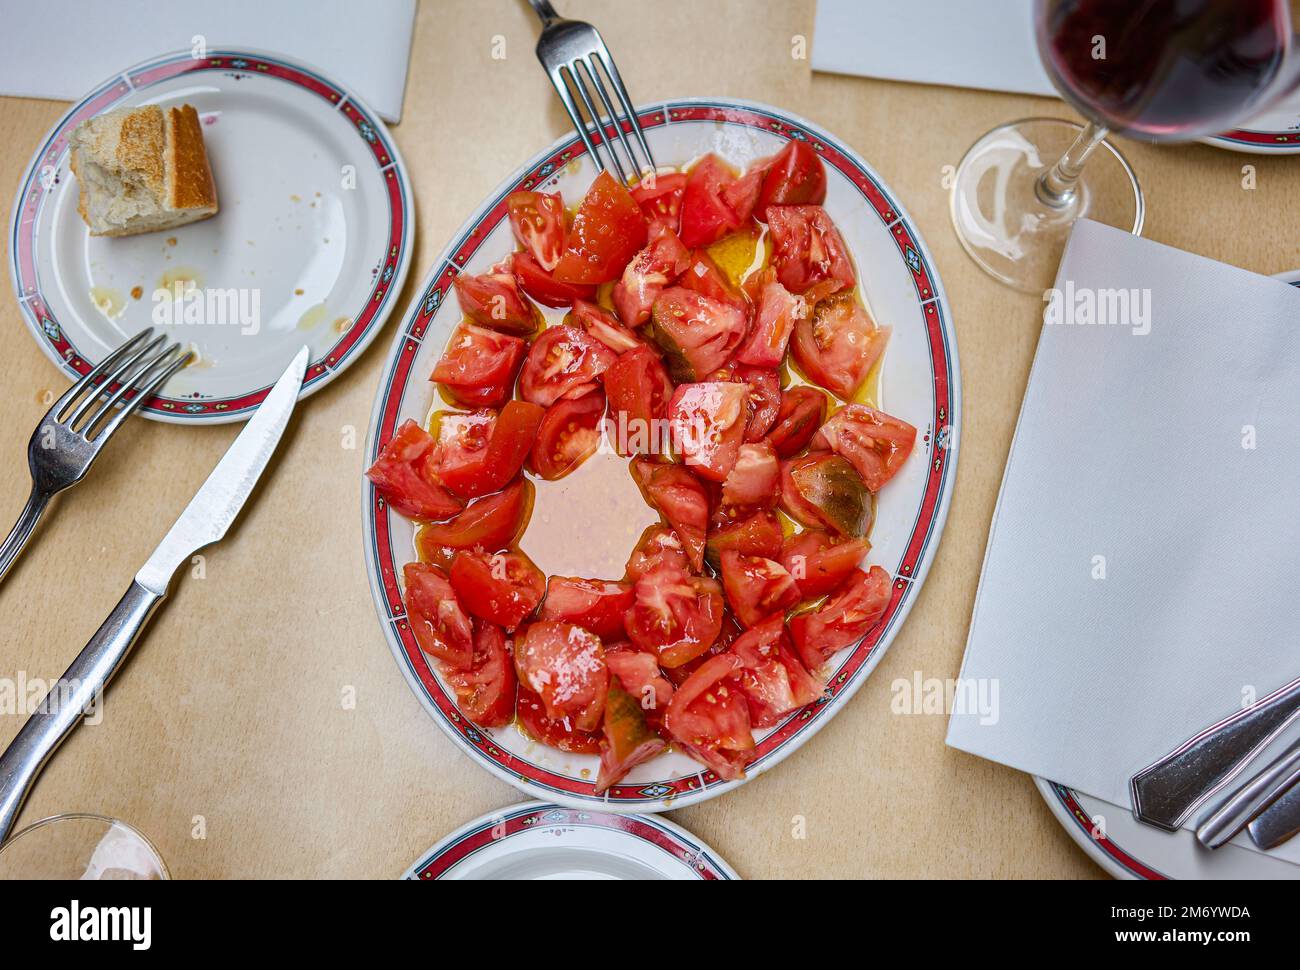 Typical Basque tomato salad, dressed with olive oil. Stock Photo